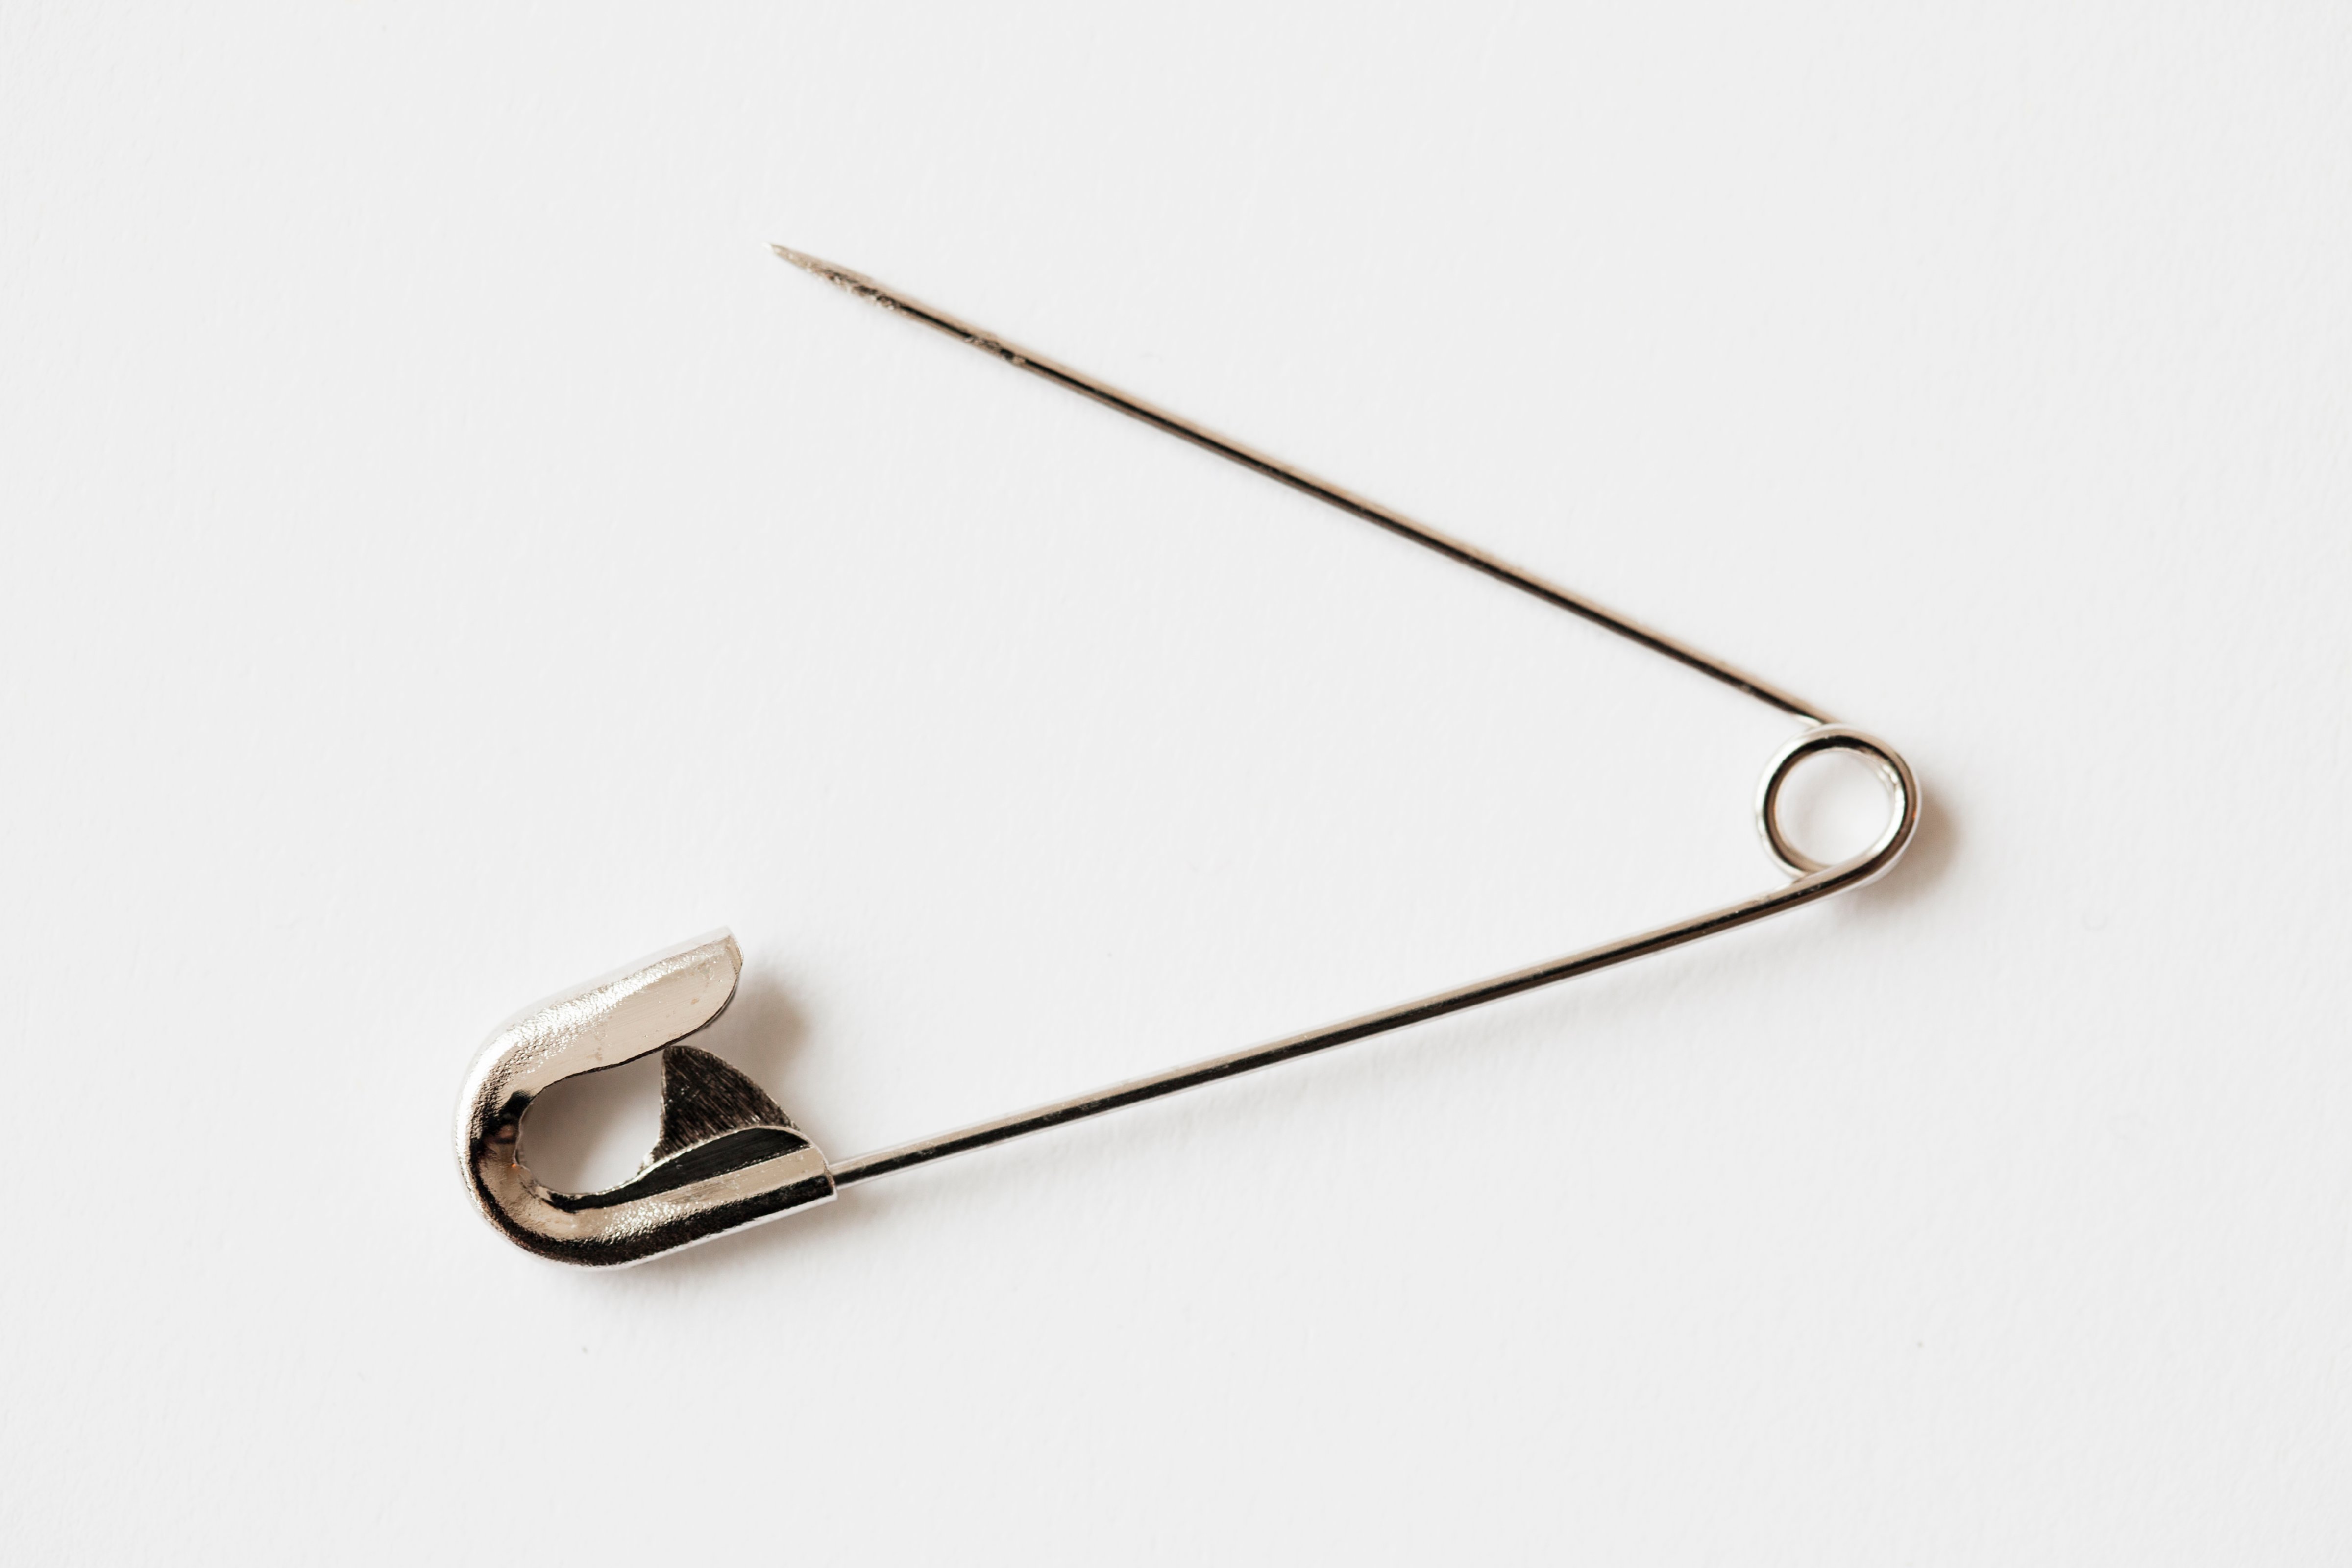 Safety pin, studio shot (Getty Images)